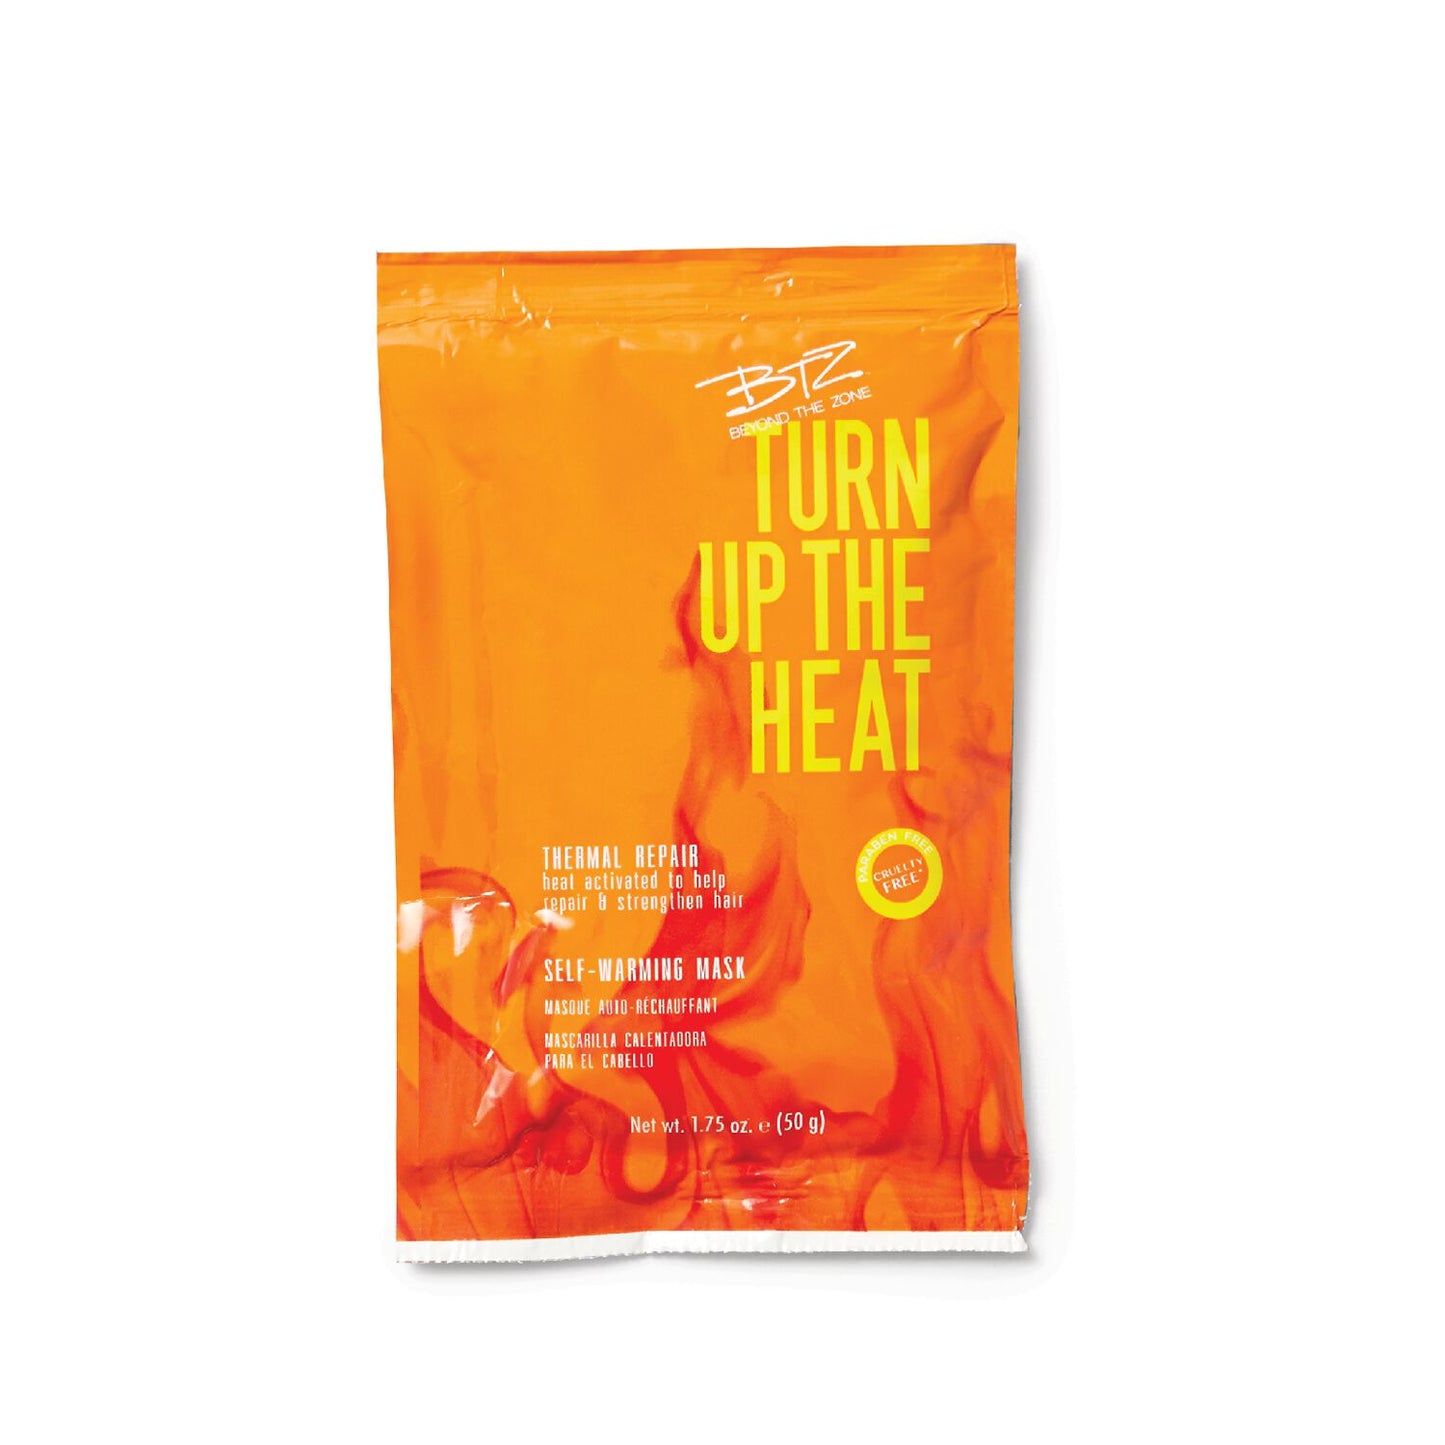 Turn Up the Heat  by   Beyond the Zone Turn Up The Heat Self-Warming Mask Packette